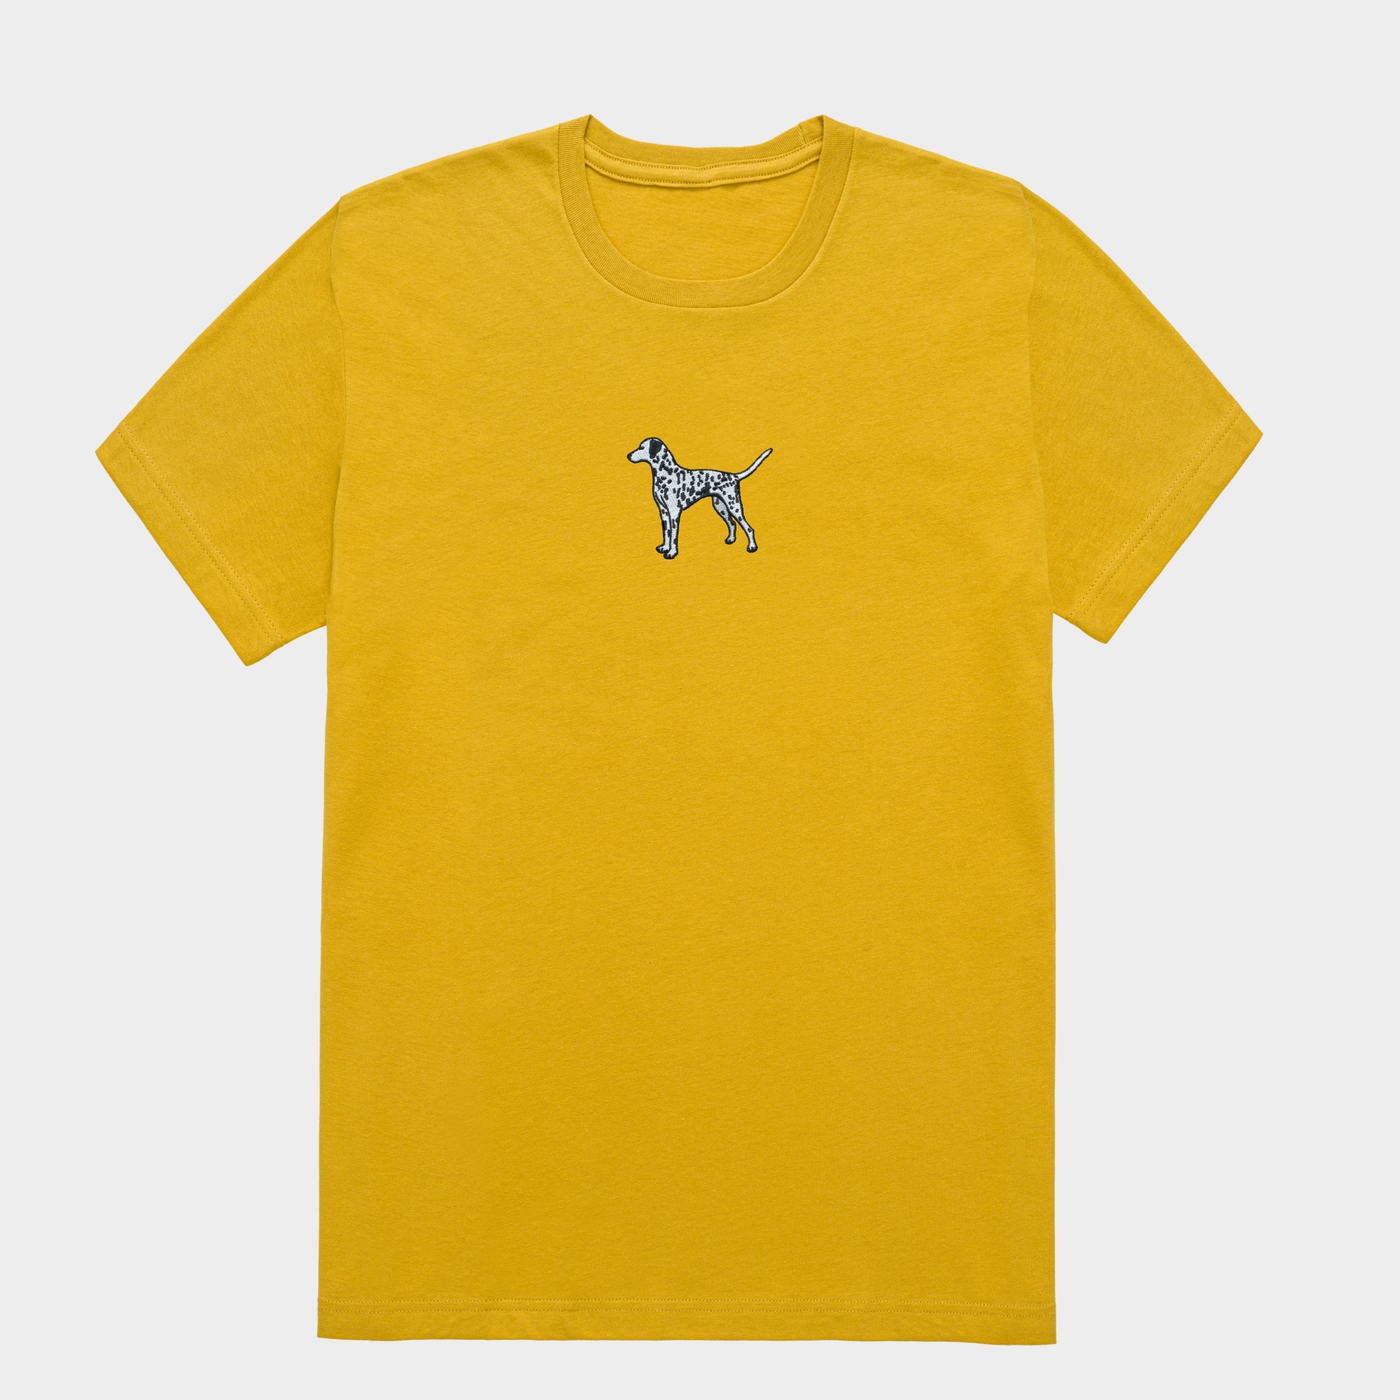 Bobby's Planet Men's Embroidered Dalmatian T-Shirt from Paws Dog Cat Animals Collection in Mustard Color#color_mustard